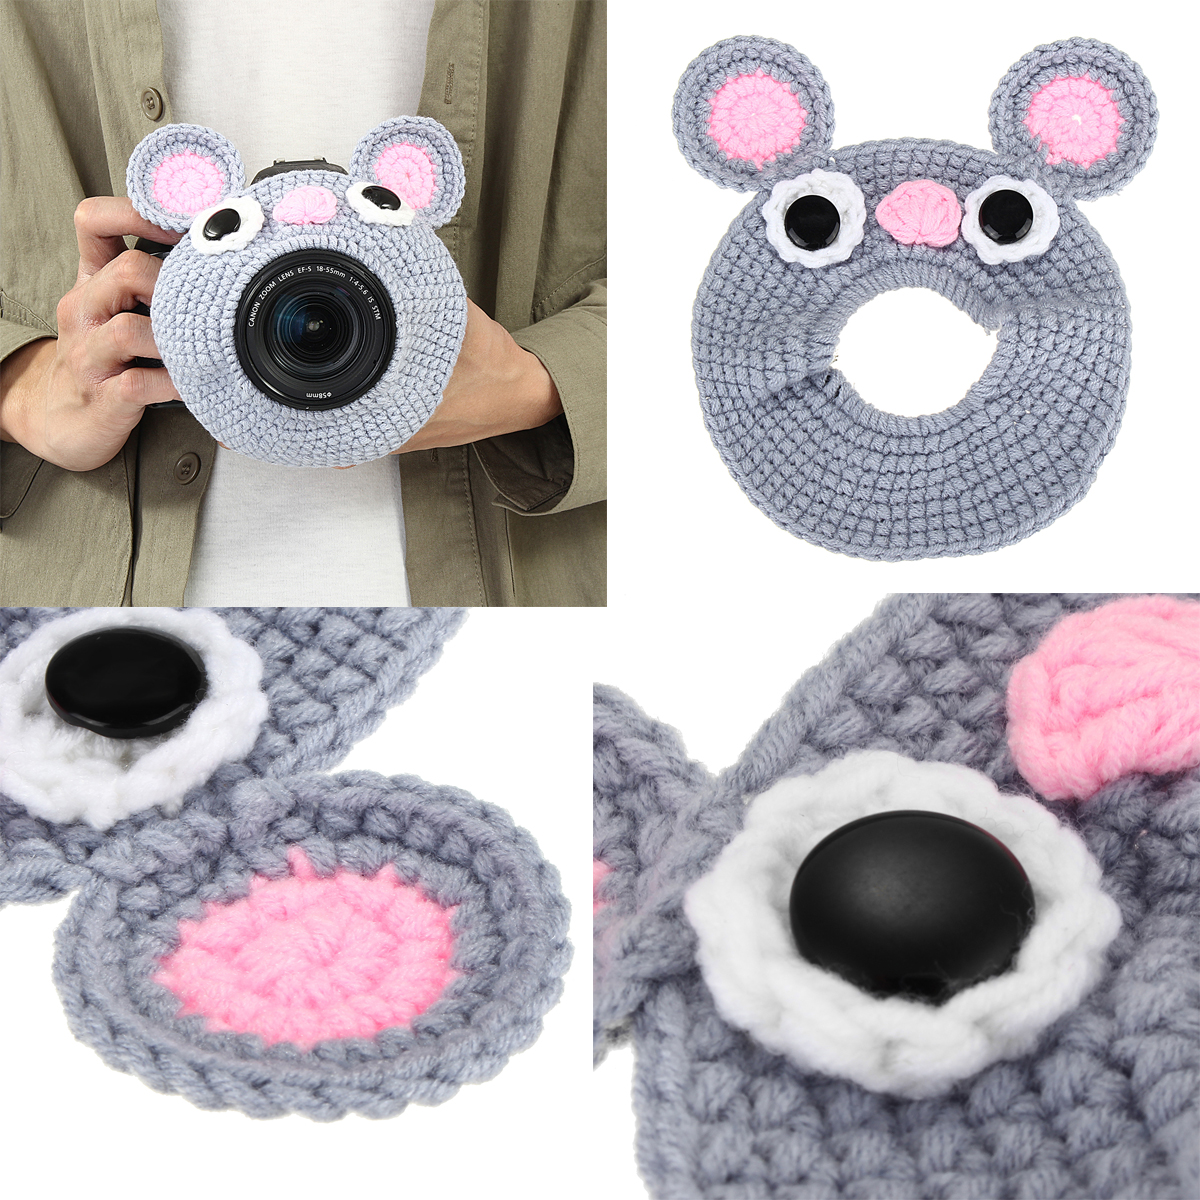 Hand-knitted-Wool-Decor-Case-For-Camera-Lens-Decorative-Photo-Guide-Doll-Toys-For-Kids-1457648-7